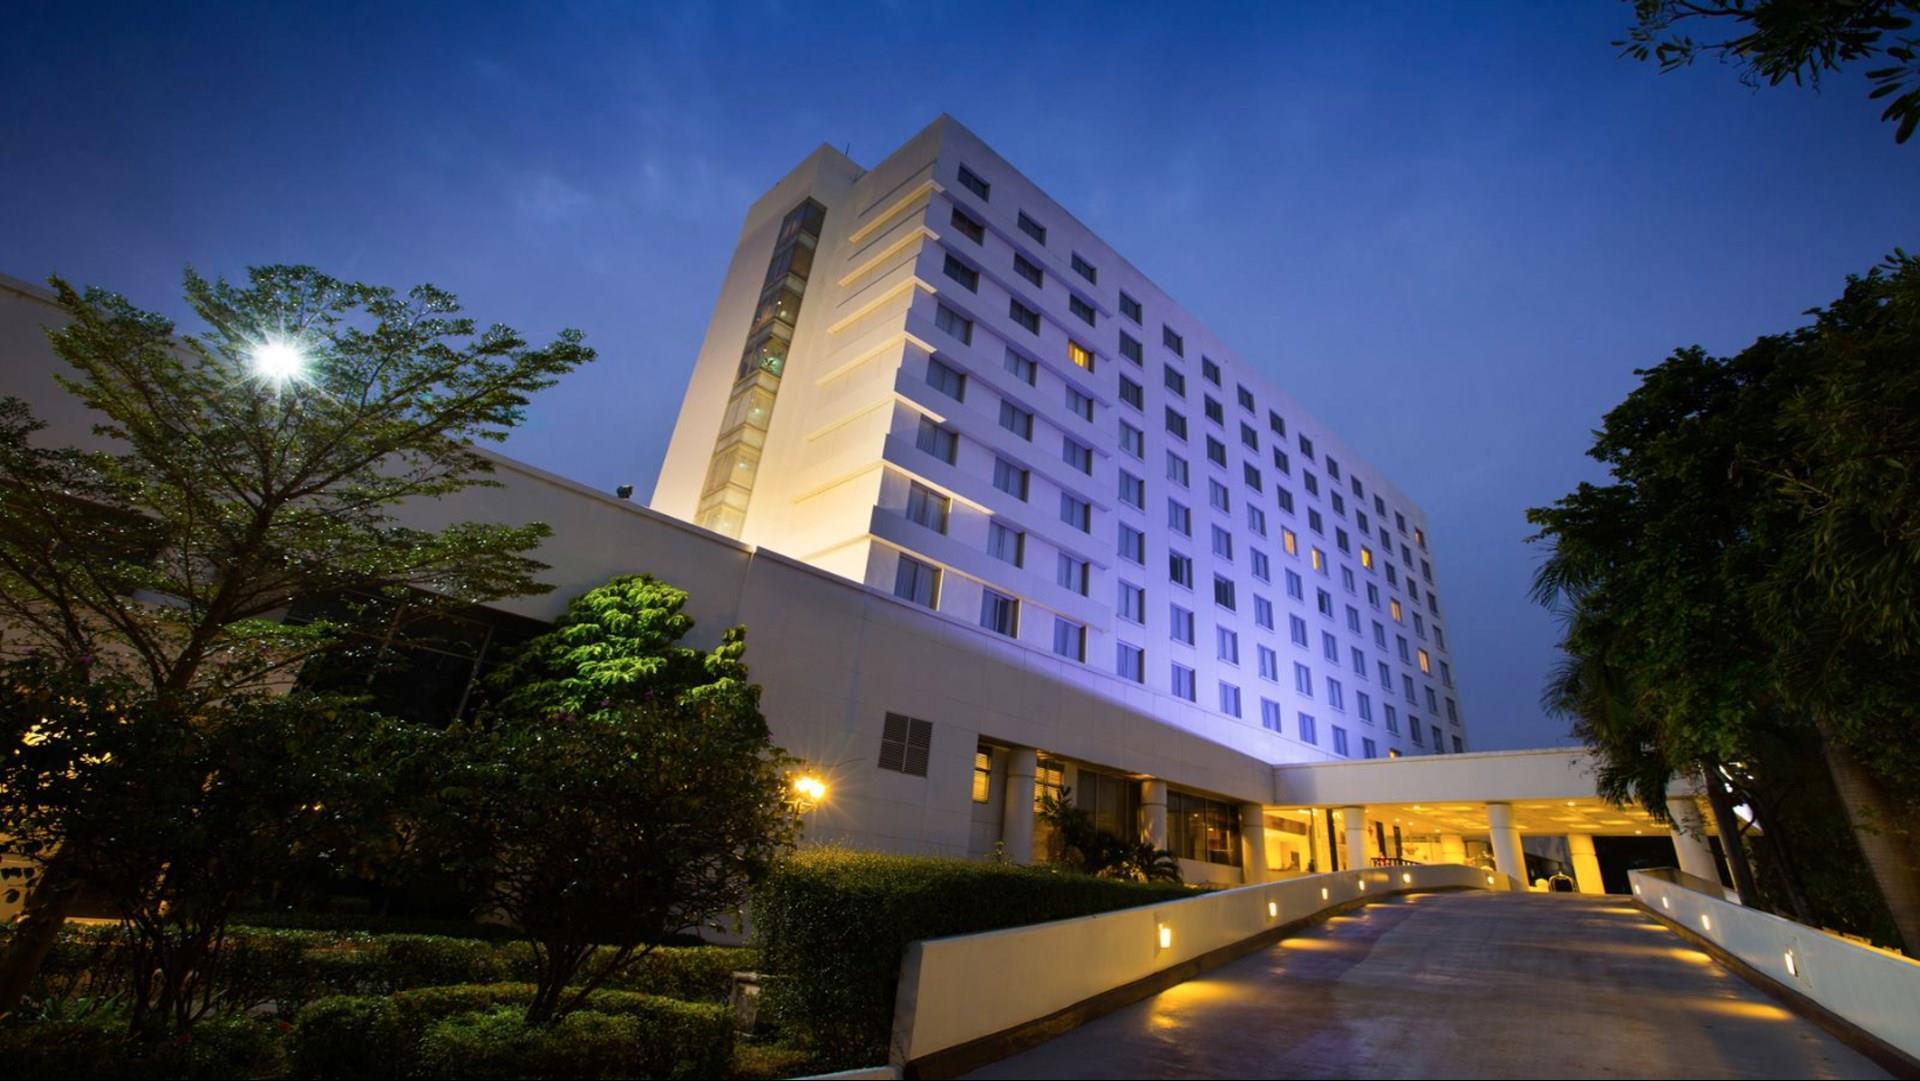 The Imperial Hotel and Convention Centre Korat in Nakhon Ratchasima, TH